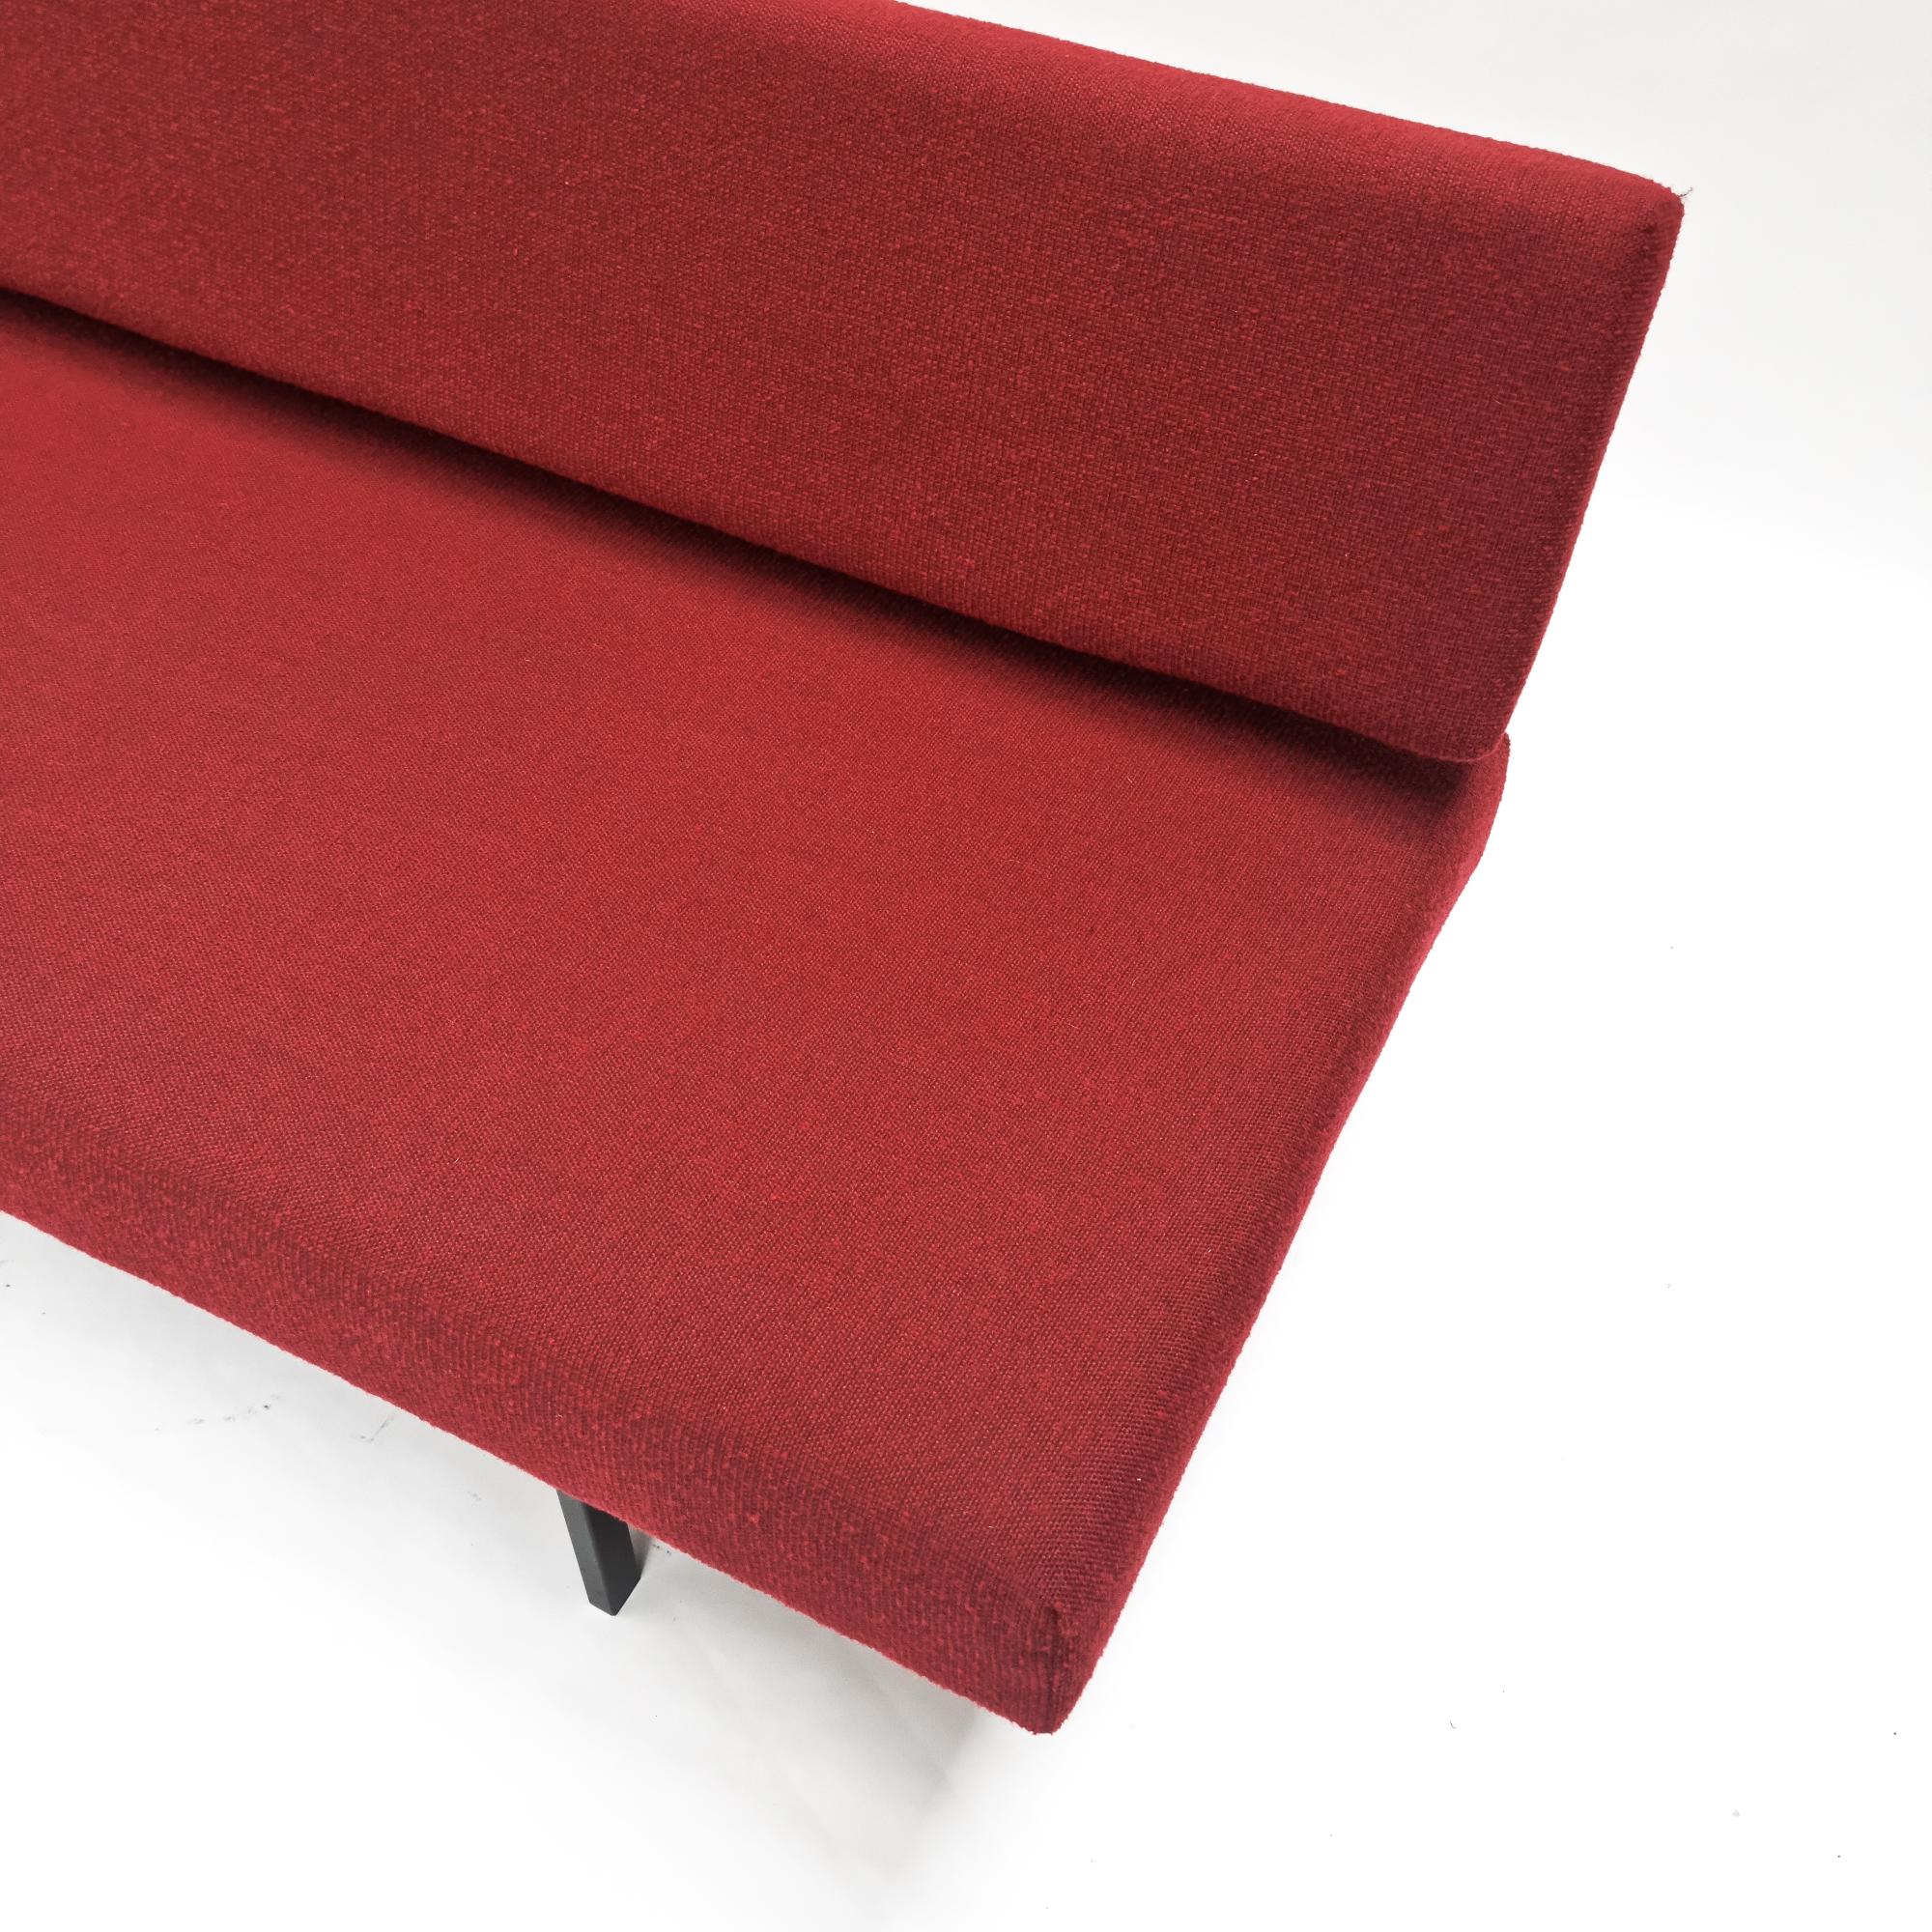 Sleeping Sofa by Martin Visser for ‘t Spectrum, 1960s In Good Condition For Sale In Hilversum, NL